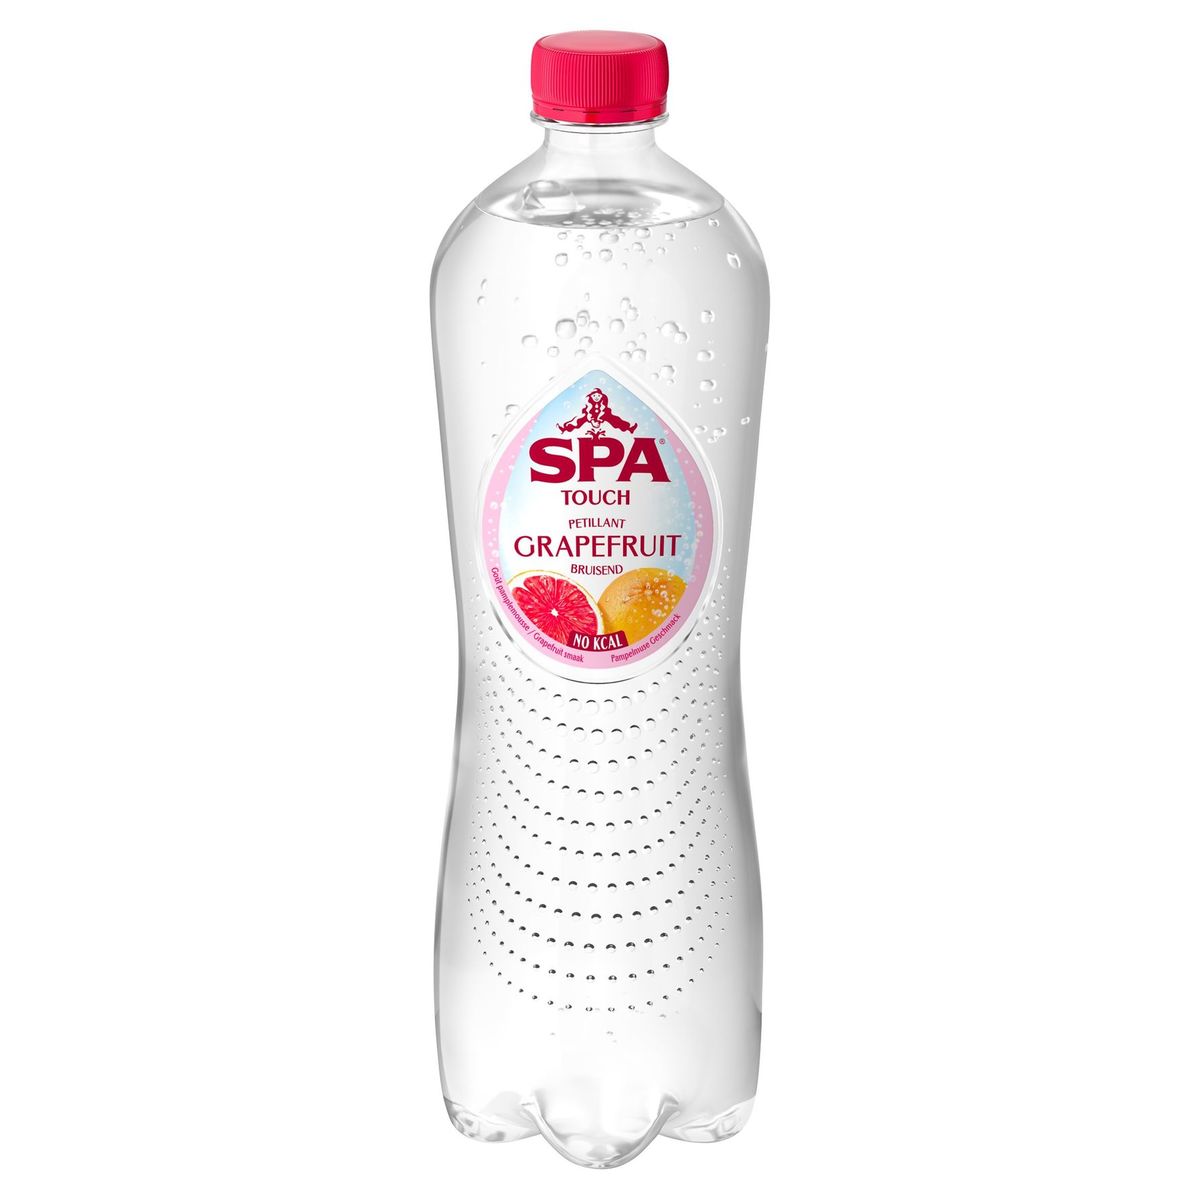 SPA TOUCH Bruisend Mineraalwater pompelmoes 1 L